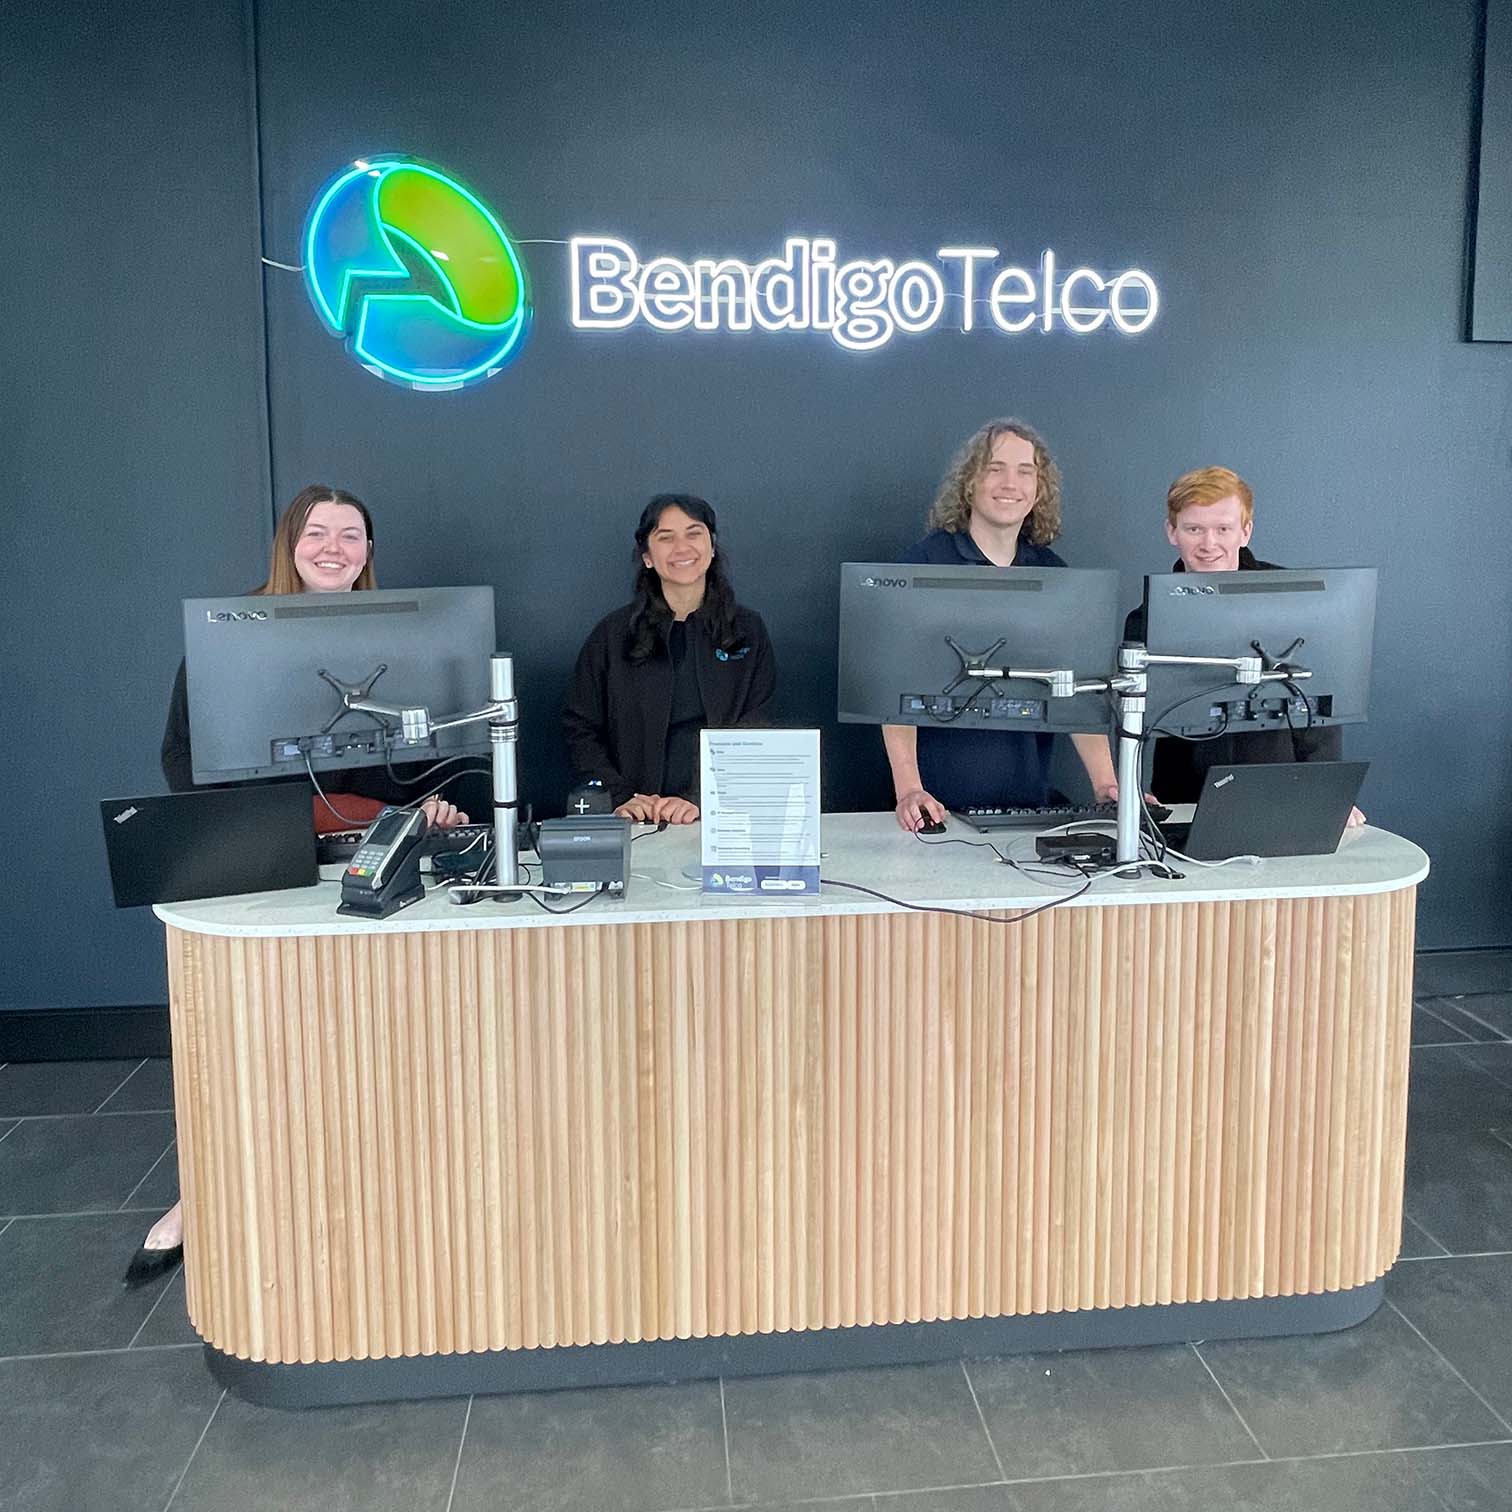 bendigo telco office with neon logo sign with counter and four employees